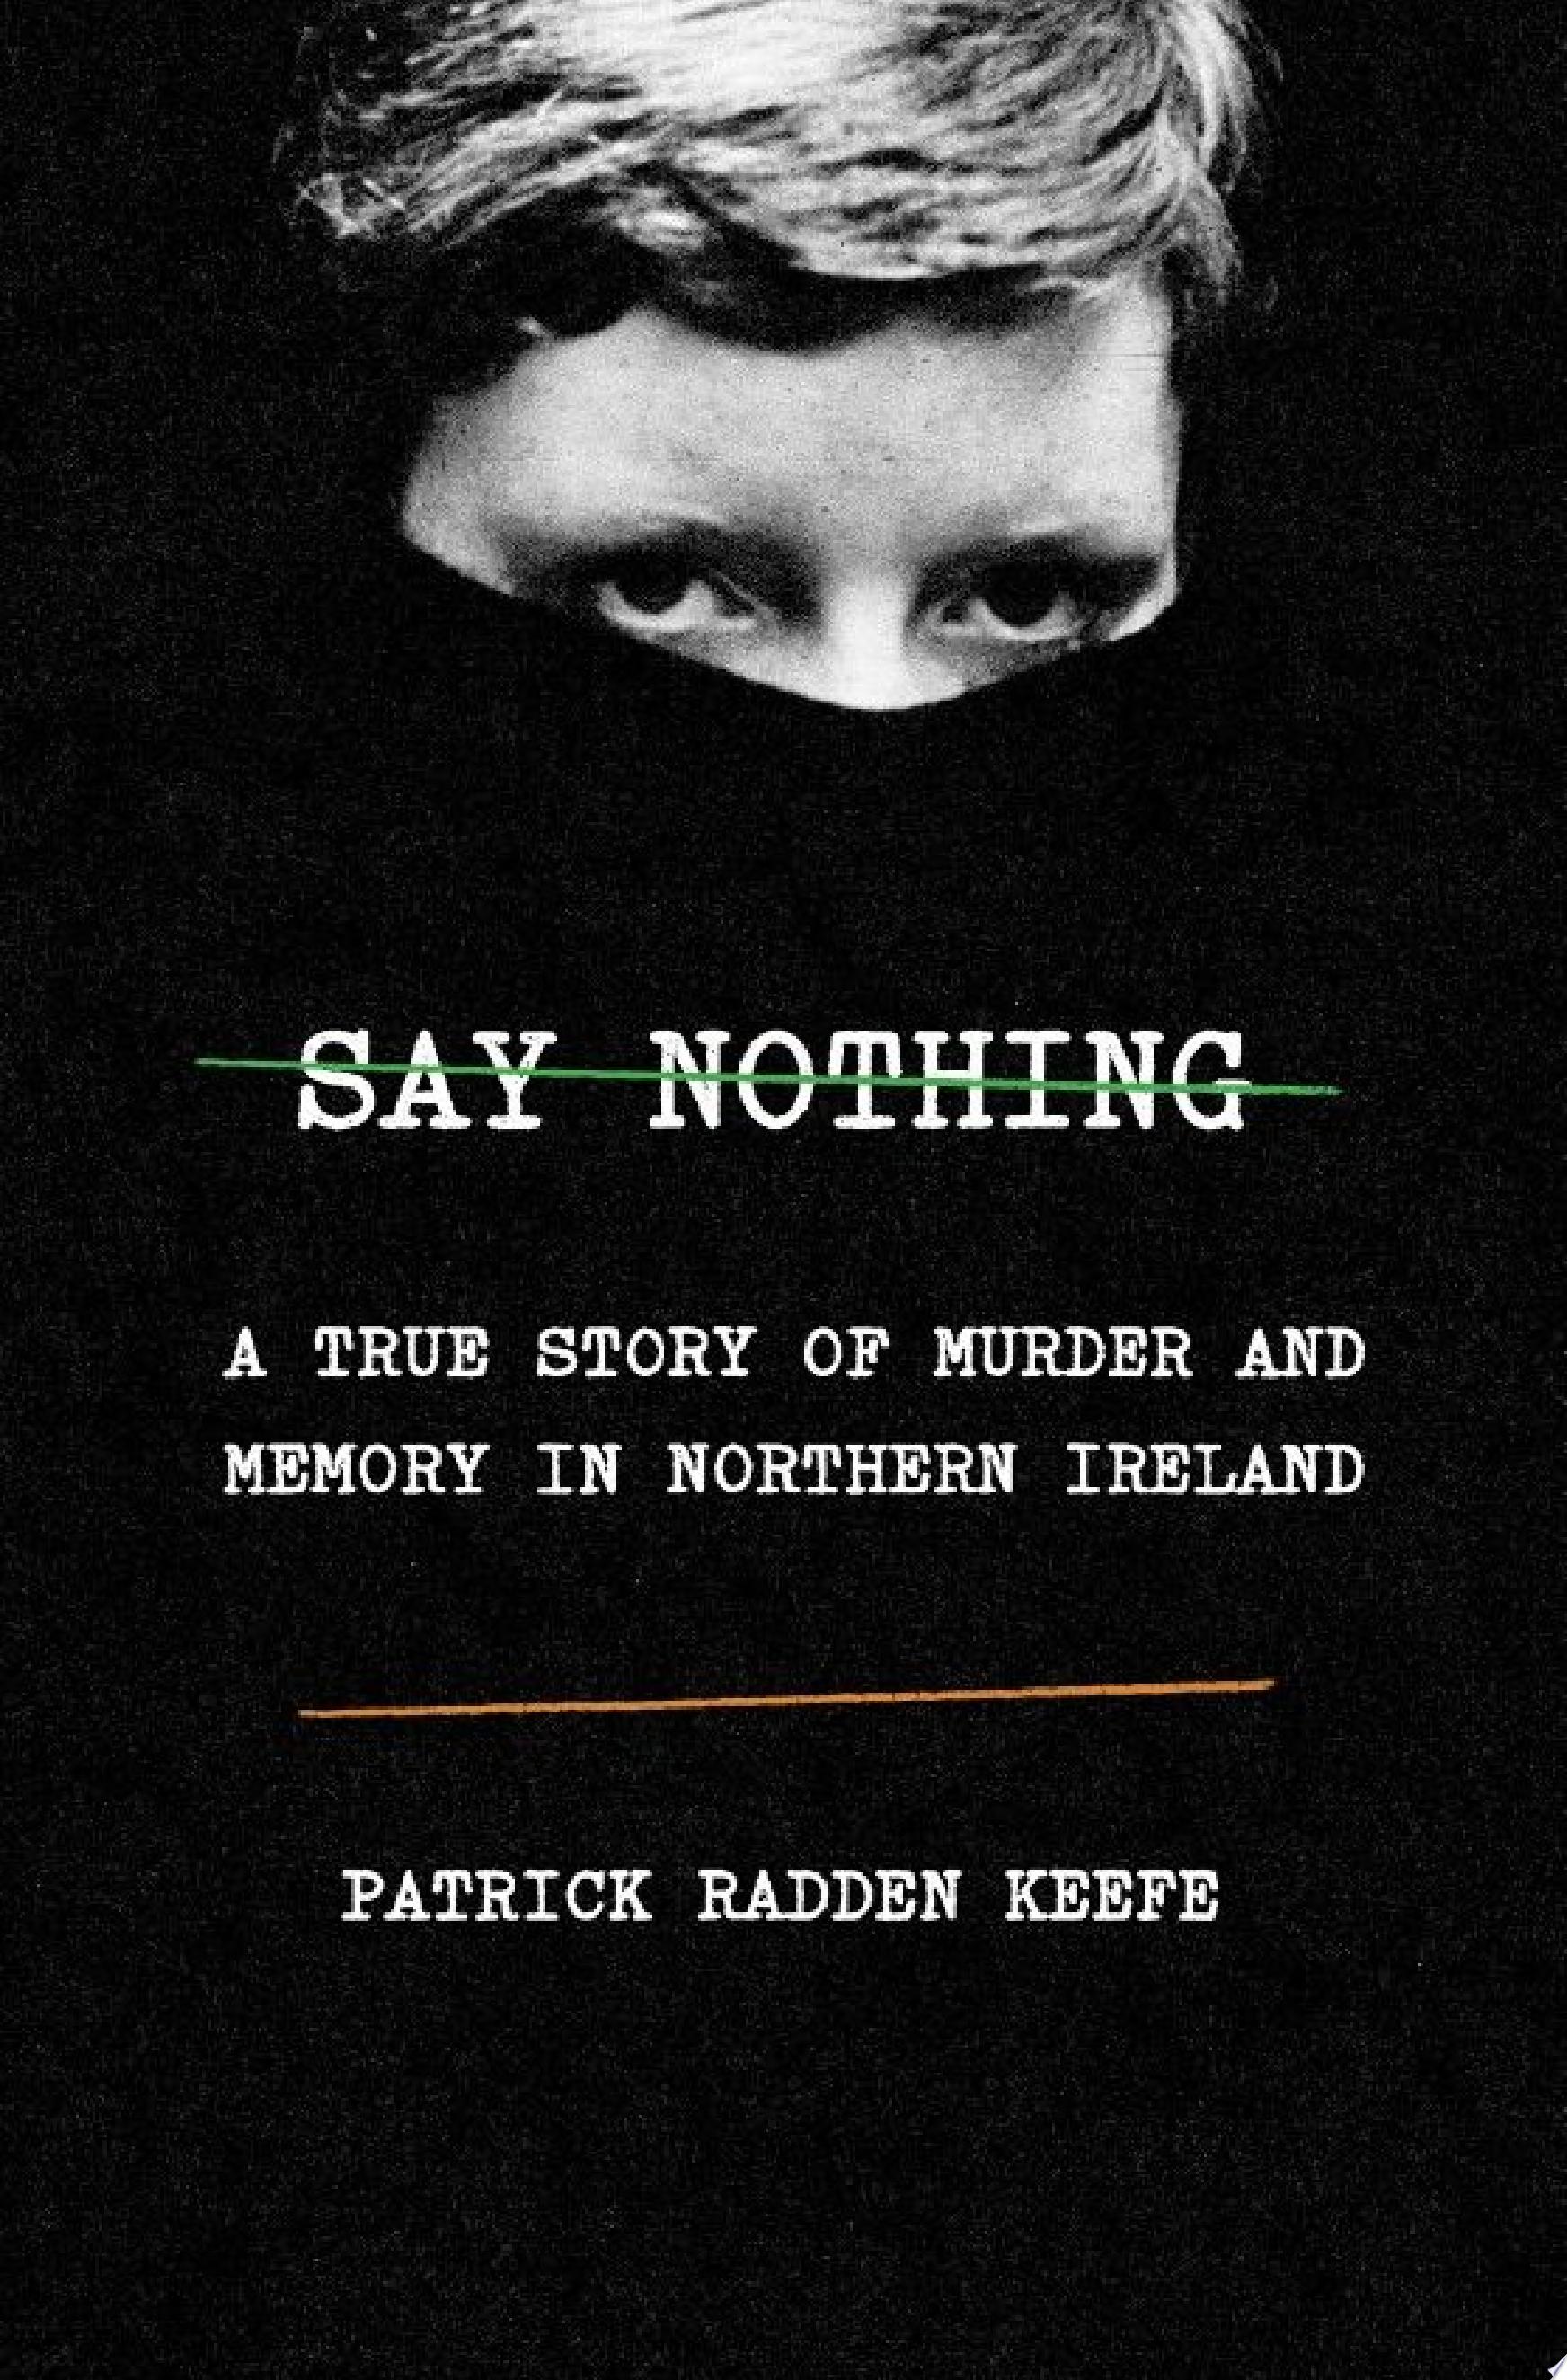 Image for "Say Nothing"